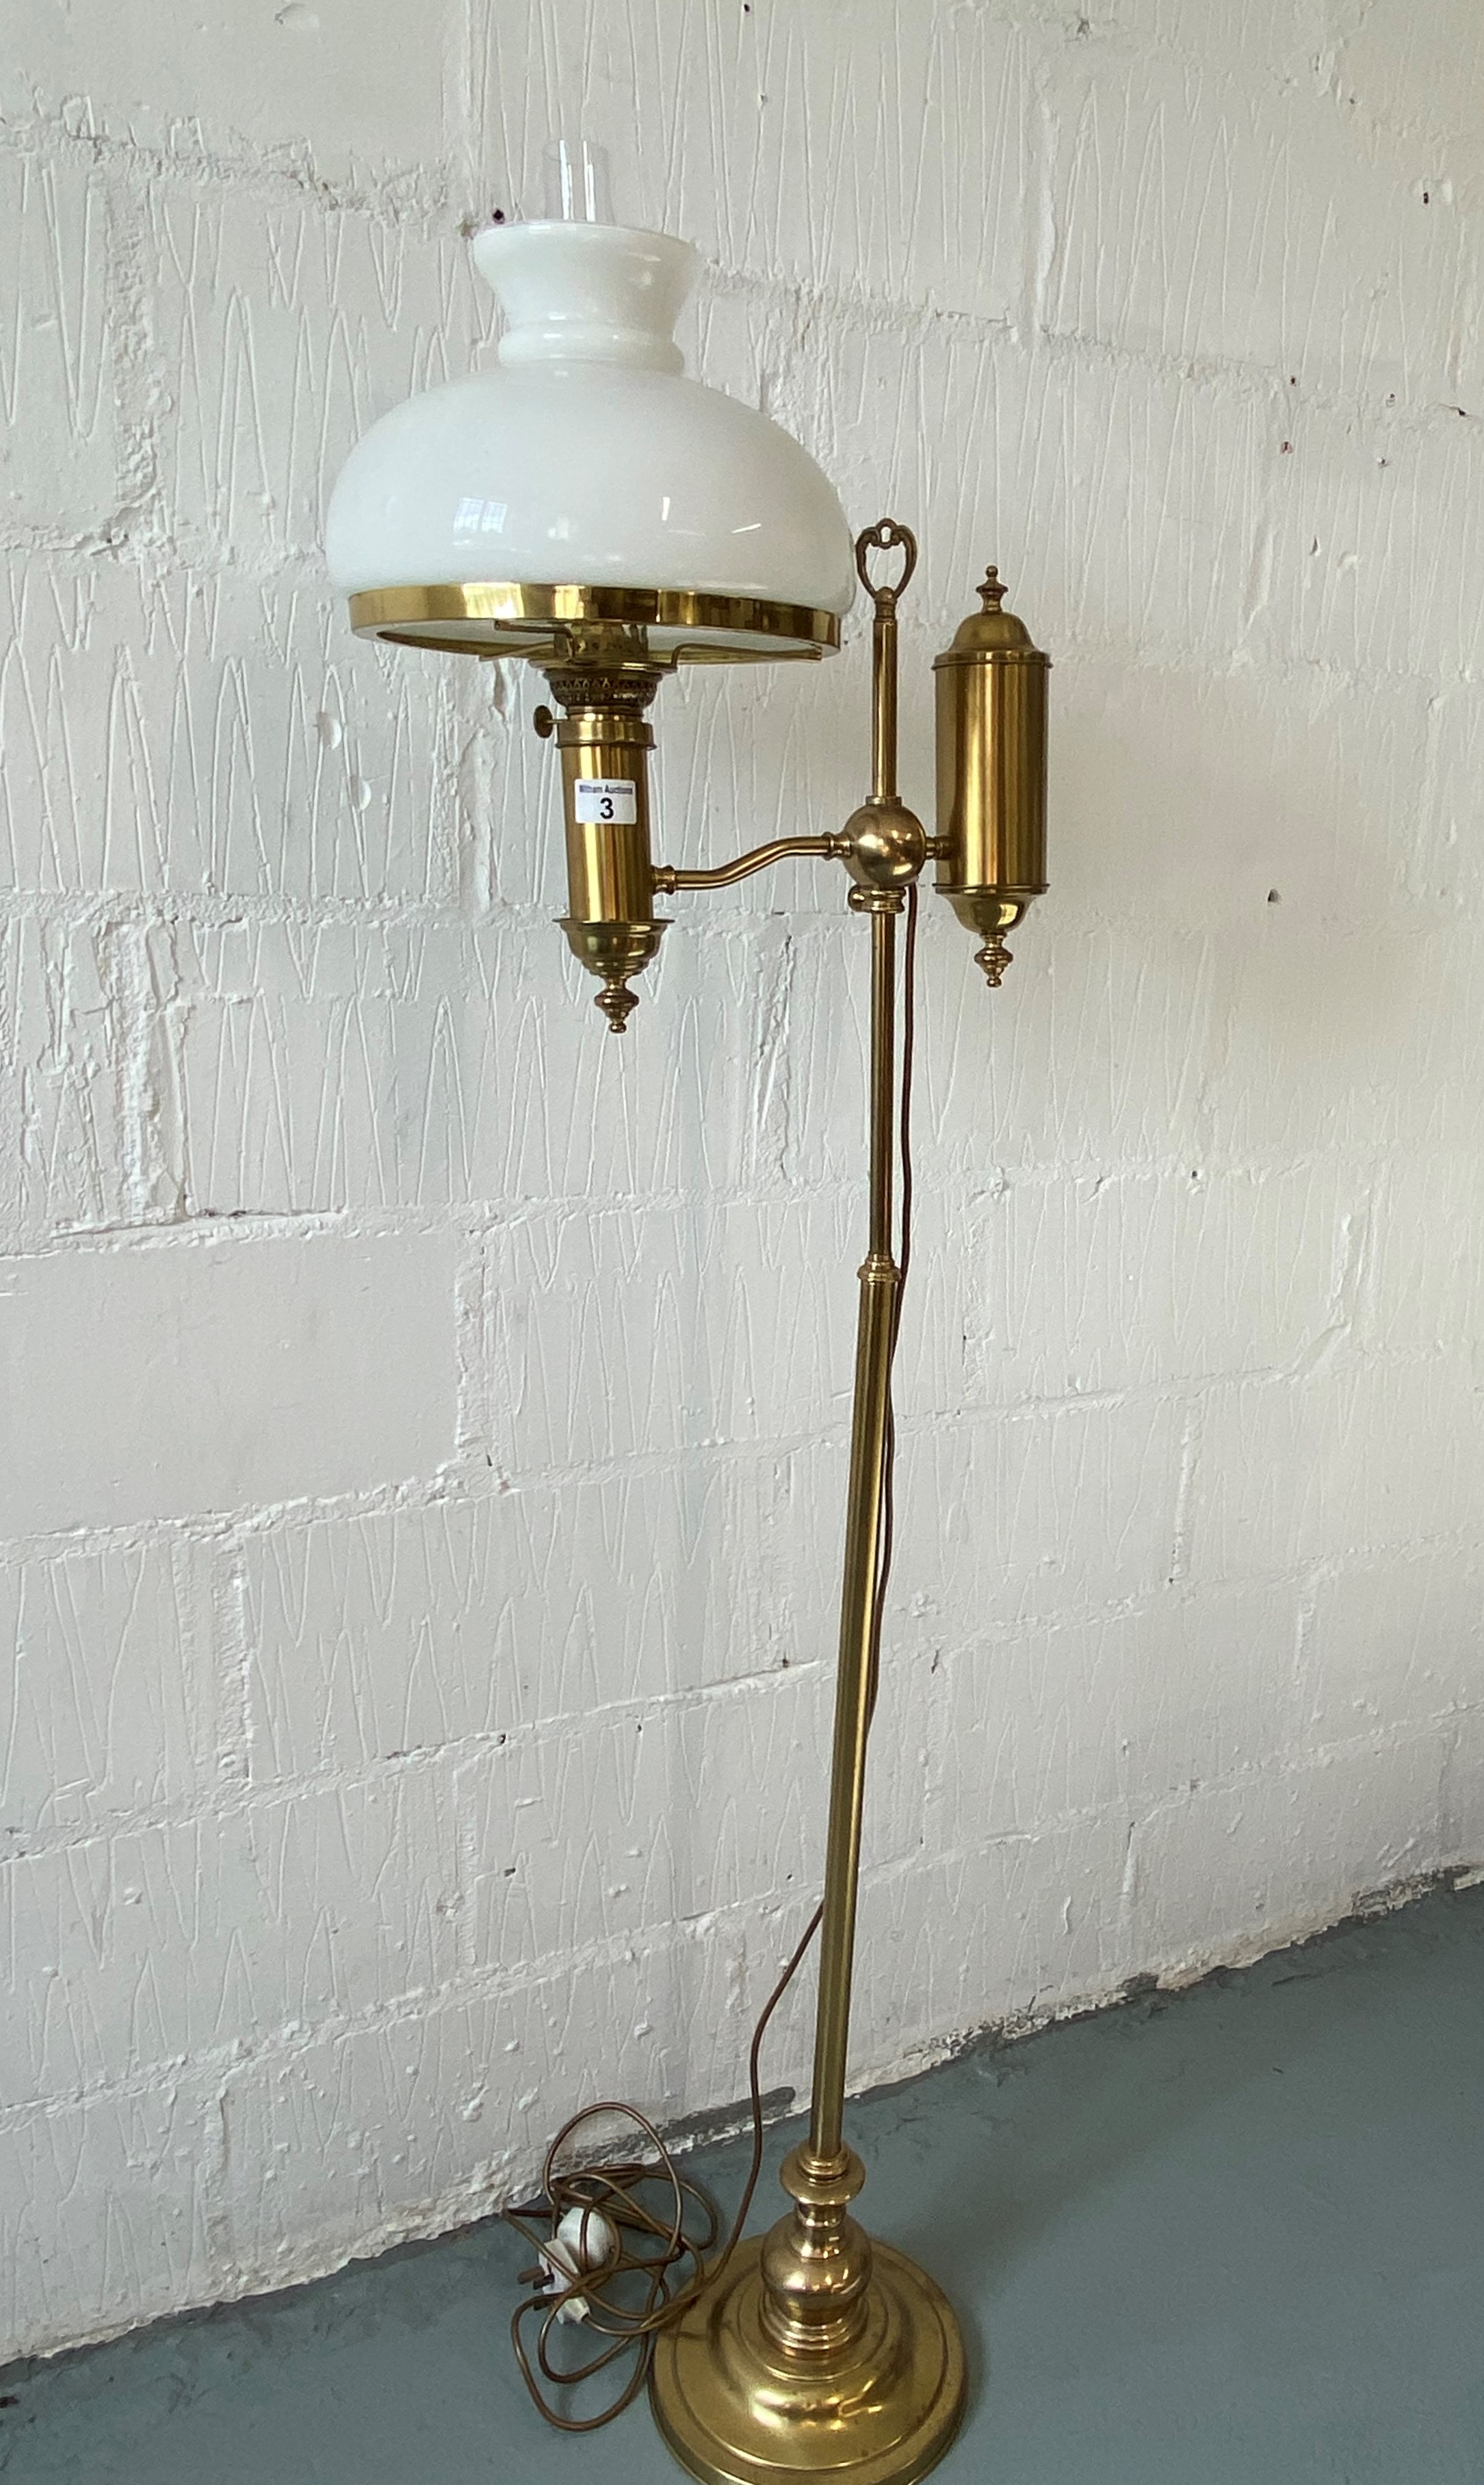 Standard brass floor lamp converted to electric, with glass funnel and glass shade